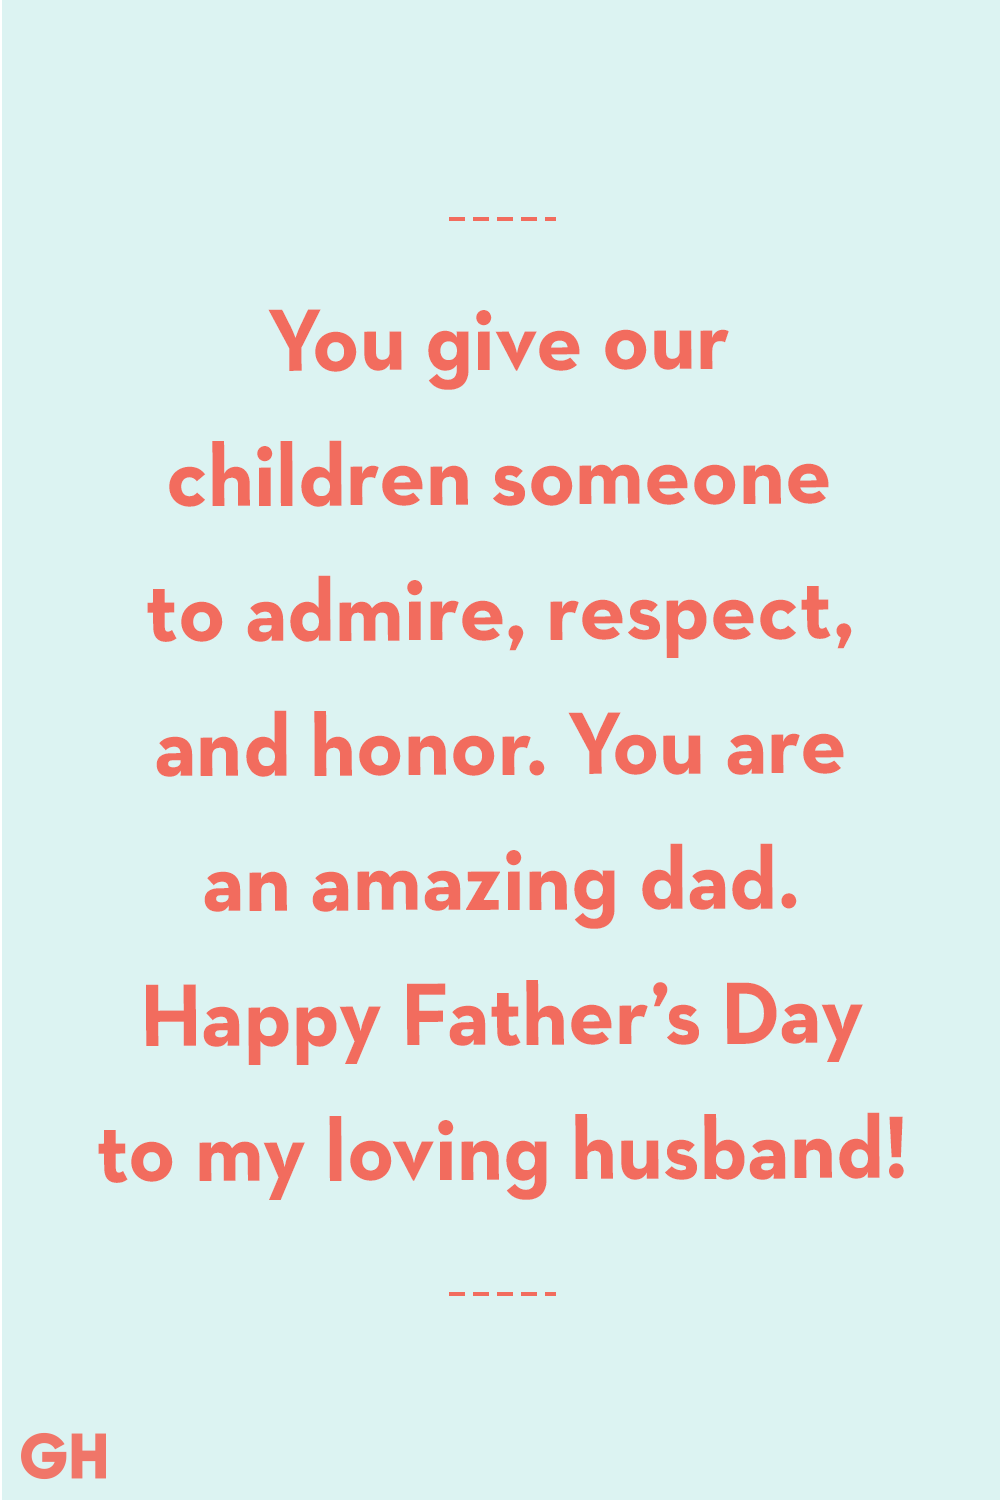 Father's Day Quotes From Wife From Wife to Husband